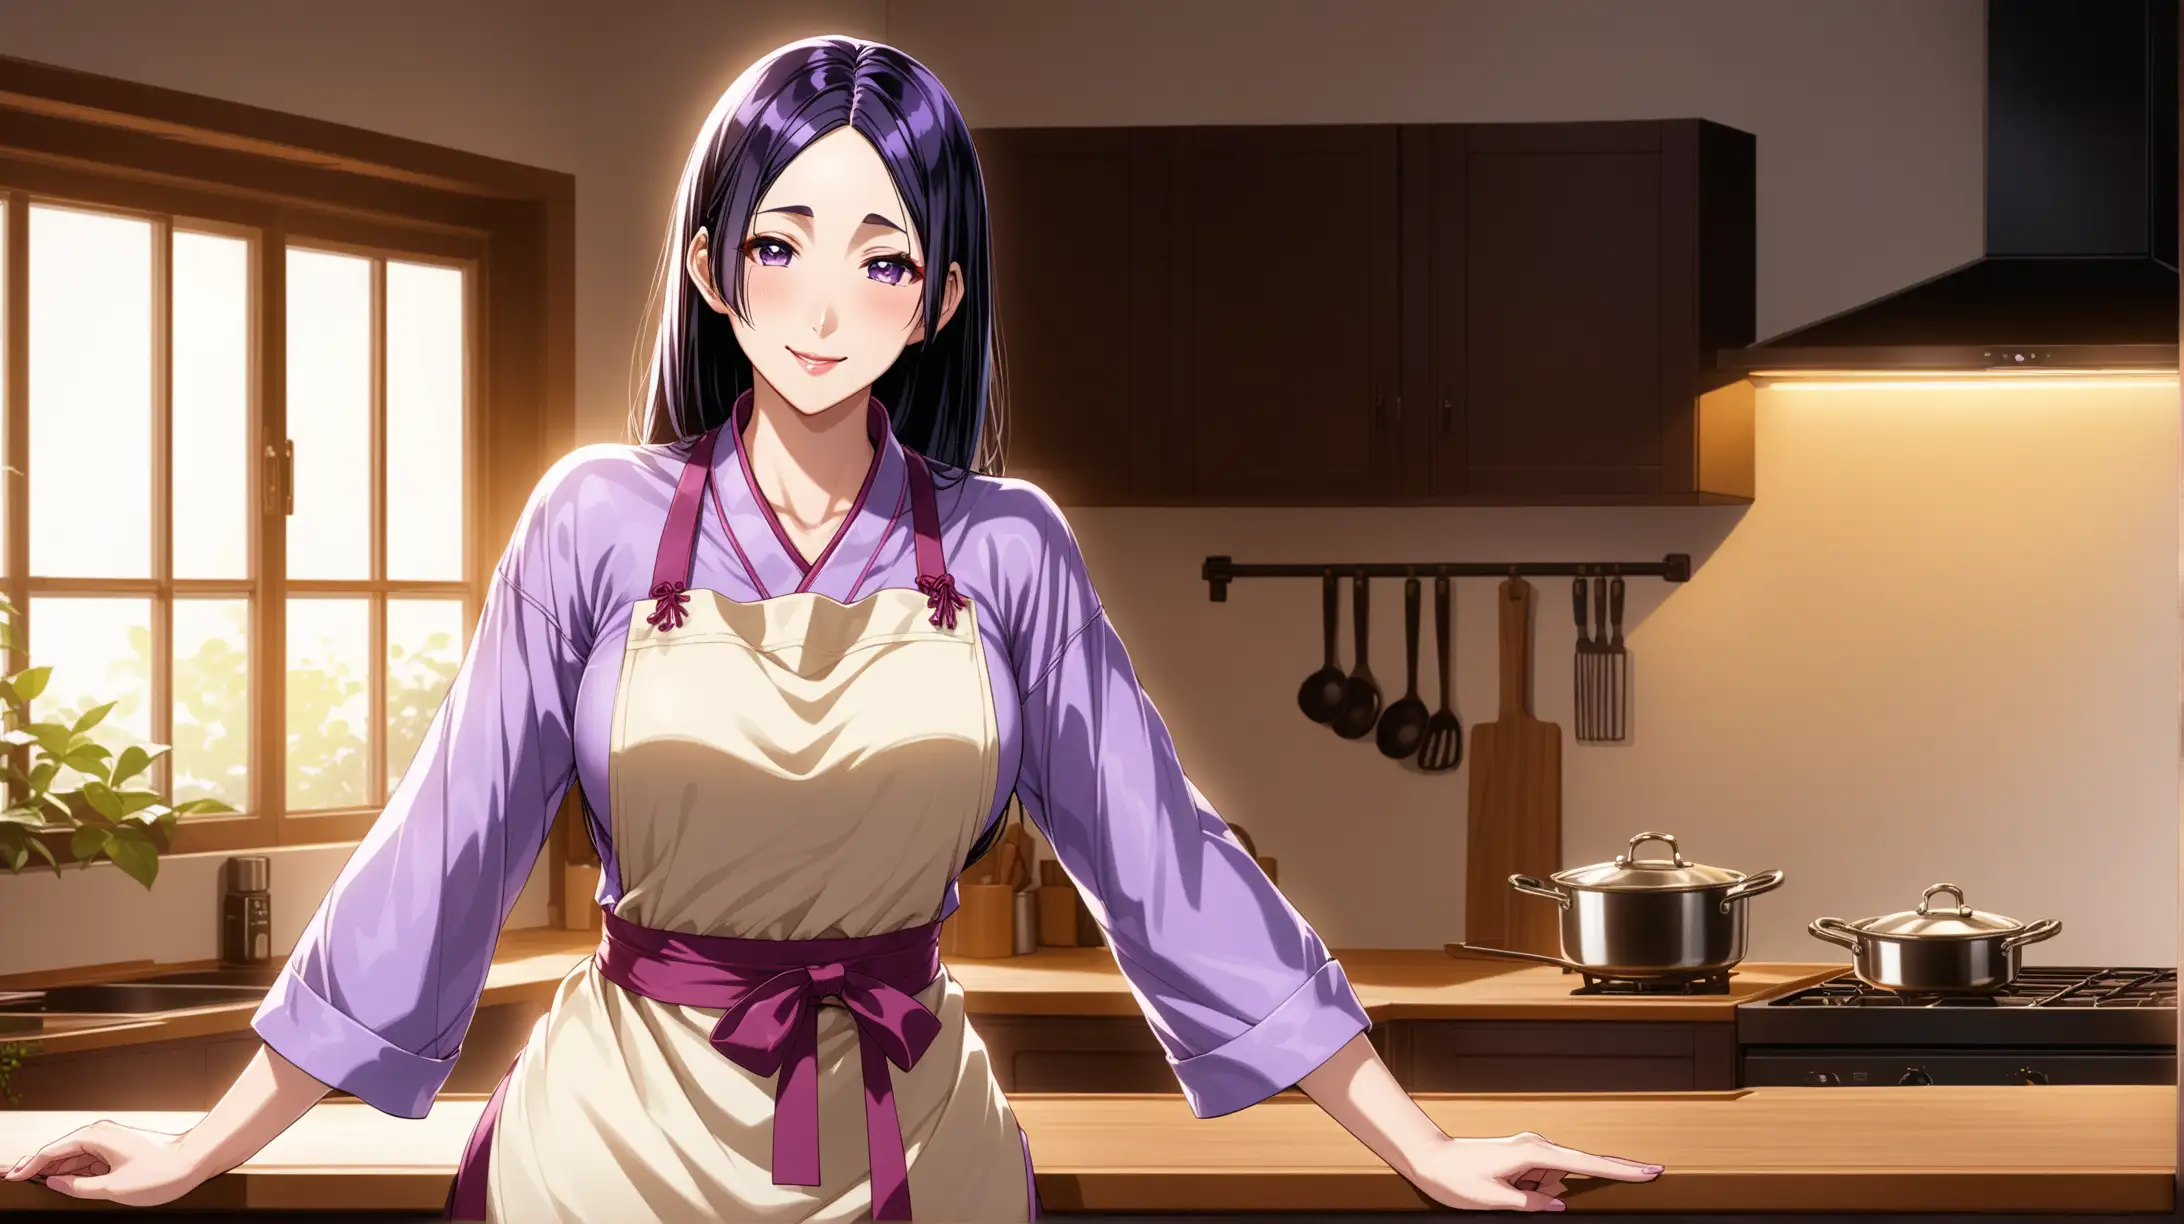 Draw the character Minamoto no Raikou, high quality, ambient lighting, long shot, indoors, kitchen, seductive pose, wearing an apron, smiling at the viewer